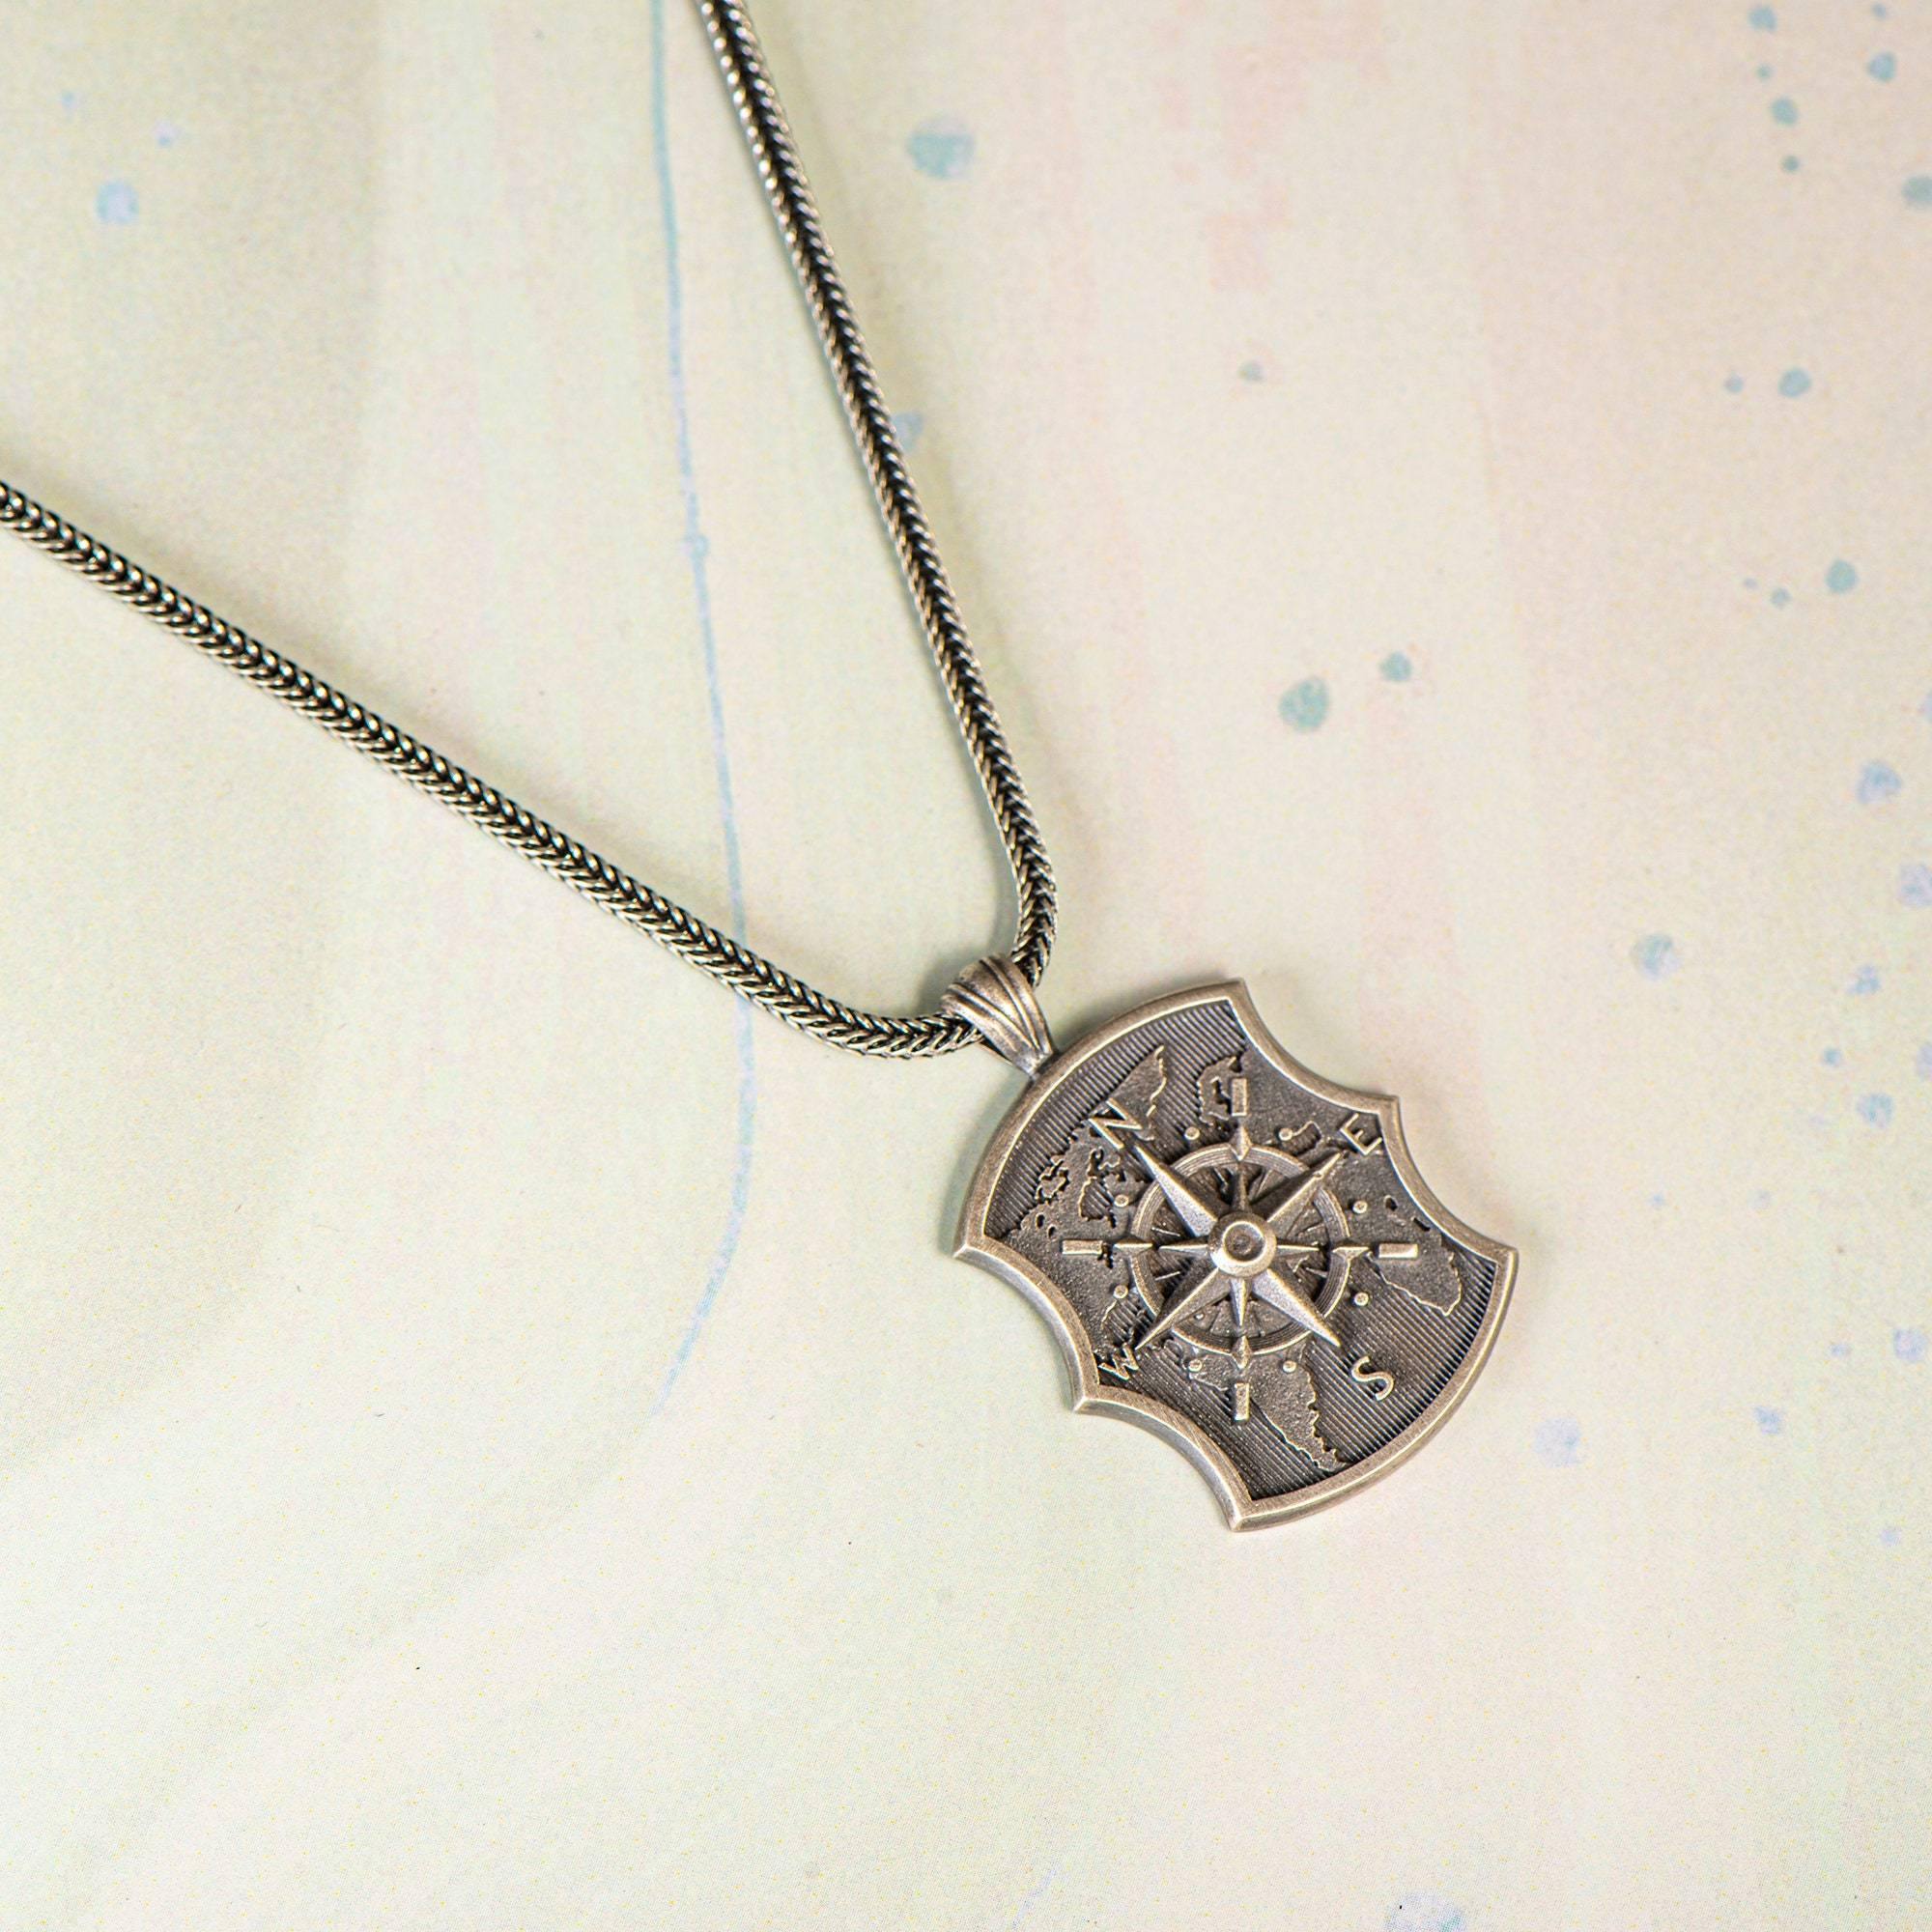 Silver Compass Necklace, Oxidized Compass Necklace, Unisex Jewelry - OXO SILVER